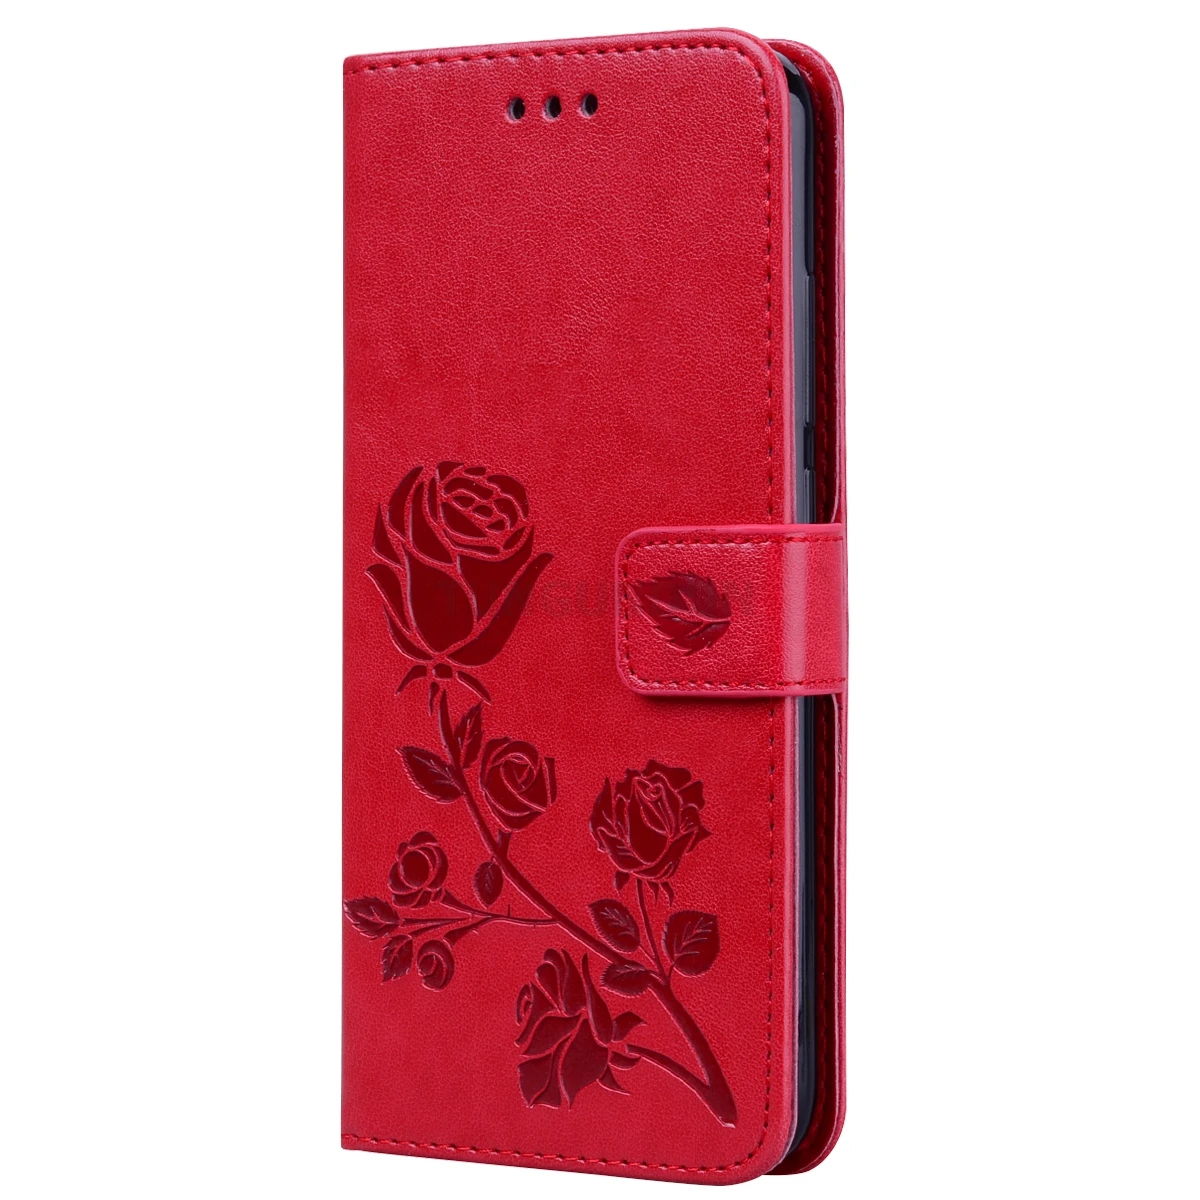 UMIDIGI Power Case Protection Stand Style PU Leather Flip Silicone Back Cover For UMIDIGI Power Mobile Phone Wallet Capa 6.3" - Цвет: MGH Red